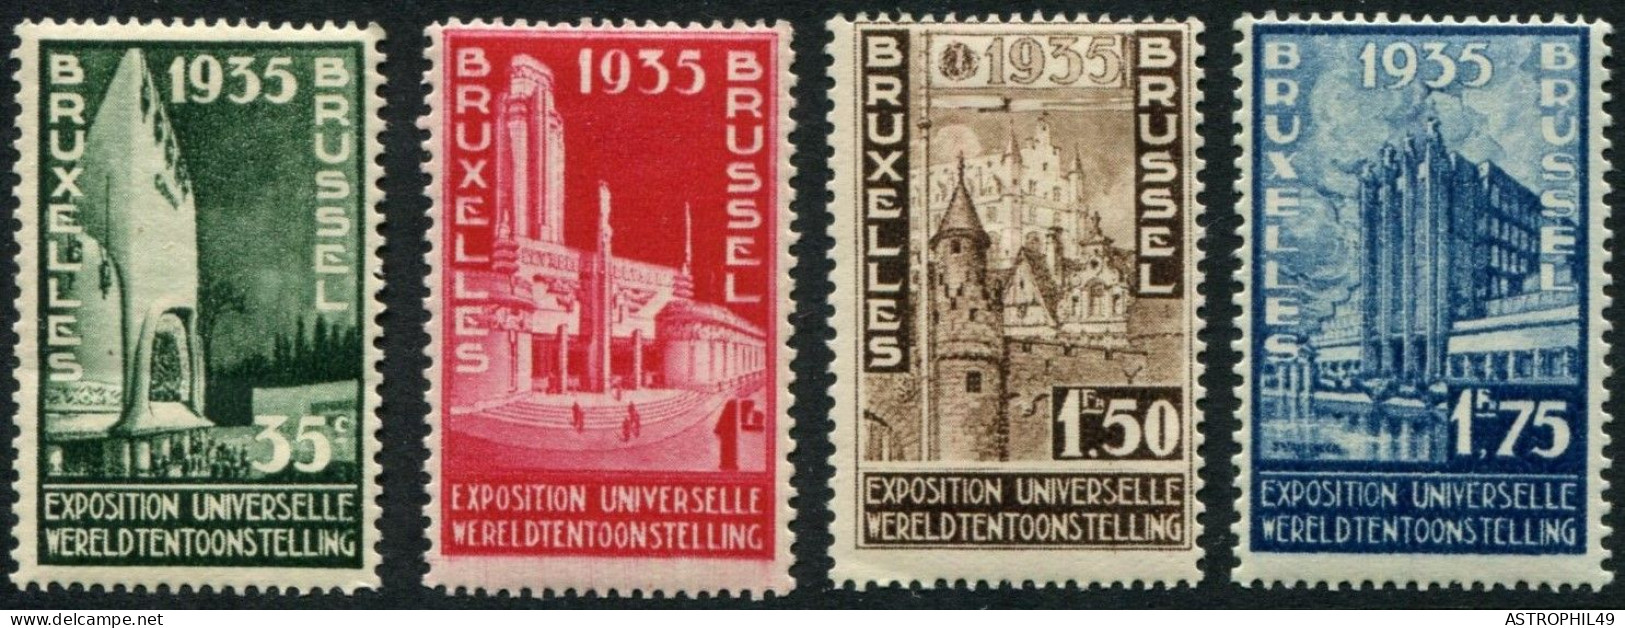 1934 BE Expo Universelle Bx 1935, Cob386-89 - 1935 – Brussels (Belgium)